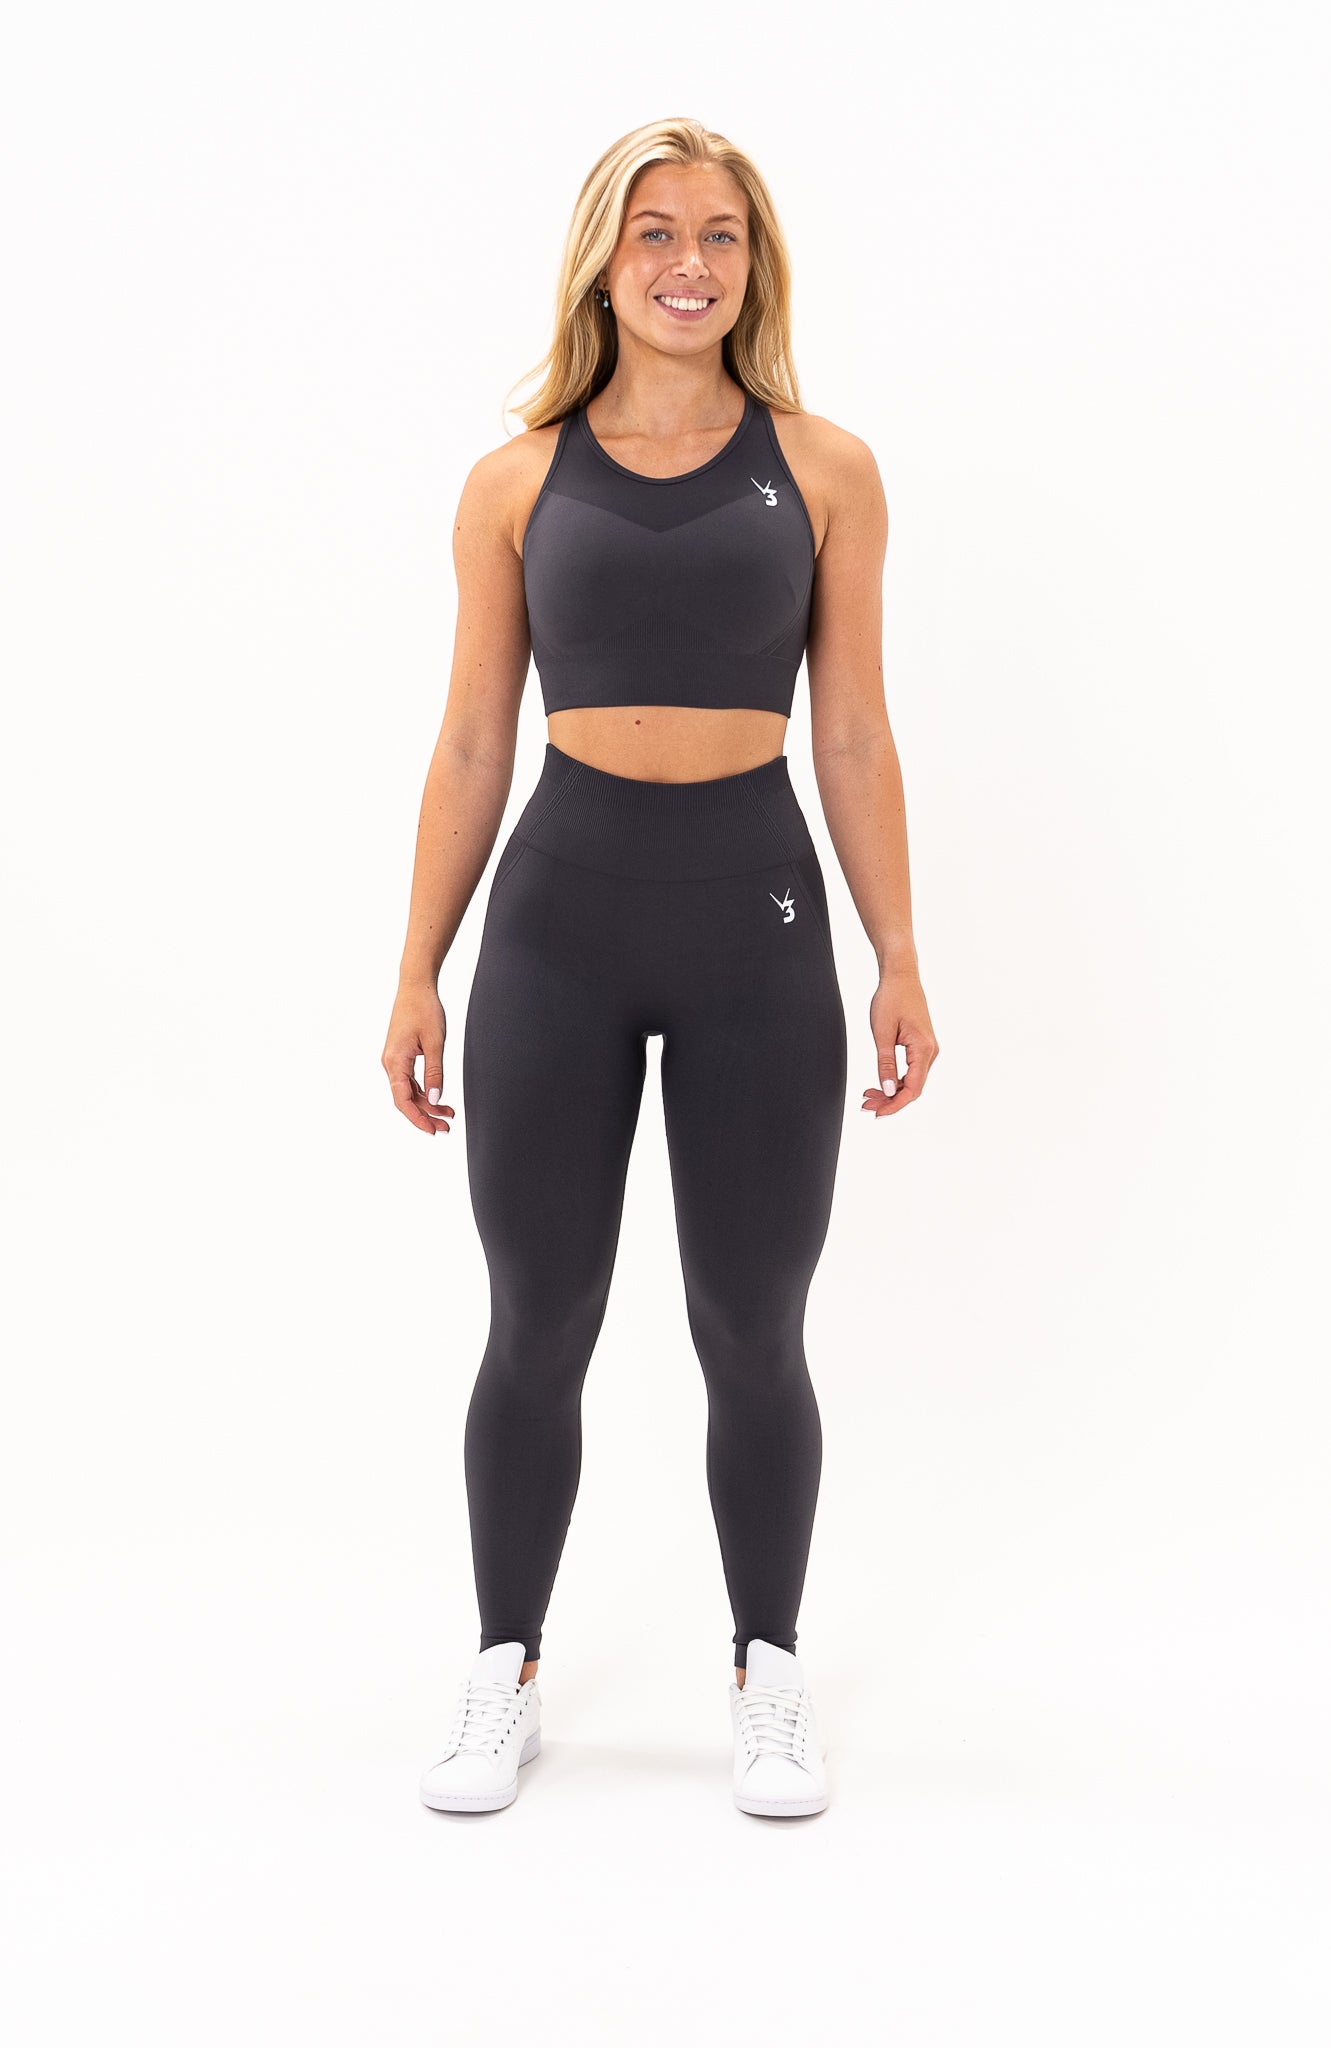 V3 Apparel Women's Tempo seamless scrunch bum shaping high waisted leggings and training sports bra in charcoal grey – Squat proof sports tights and training bra for Gym workouts training, Running, yoga, bodybuilding and bikini fitness.